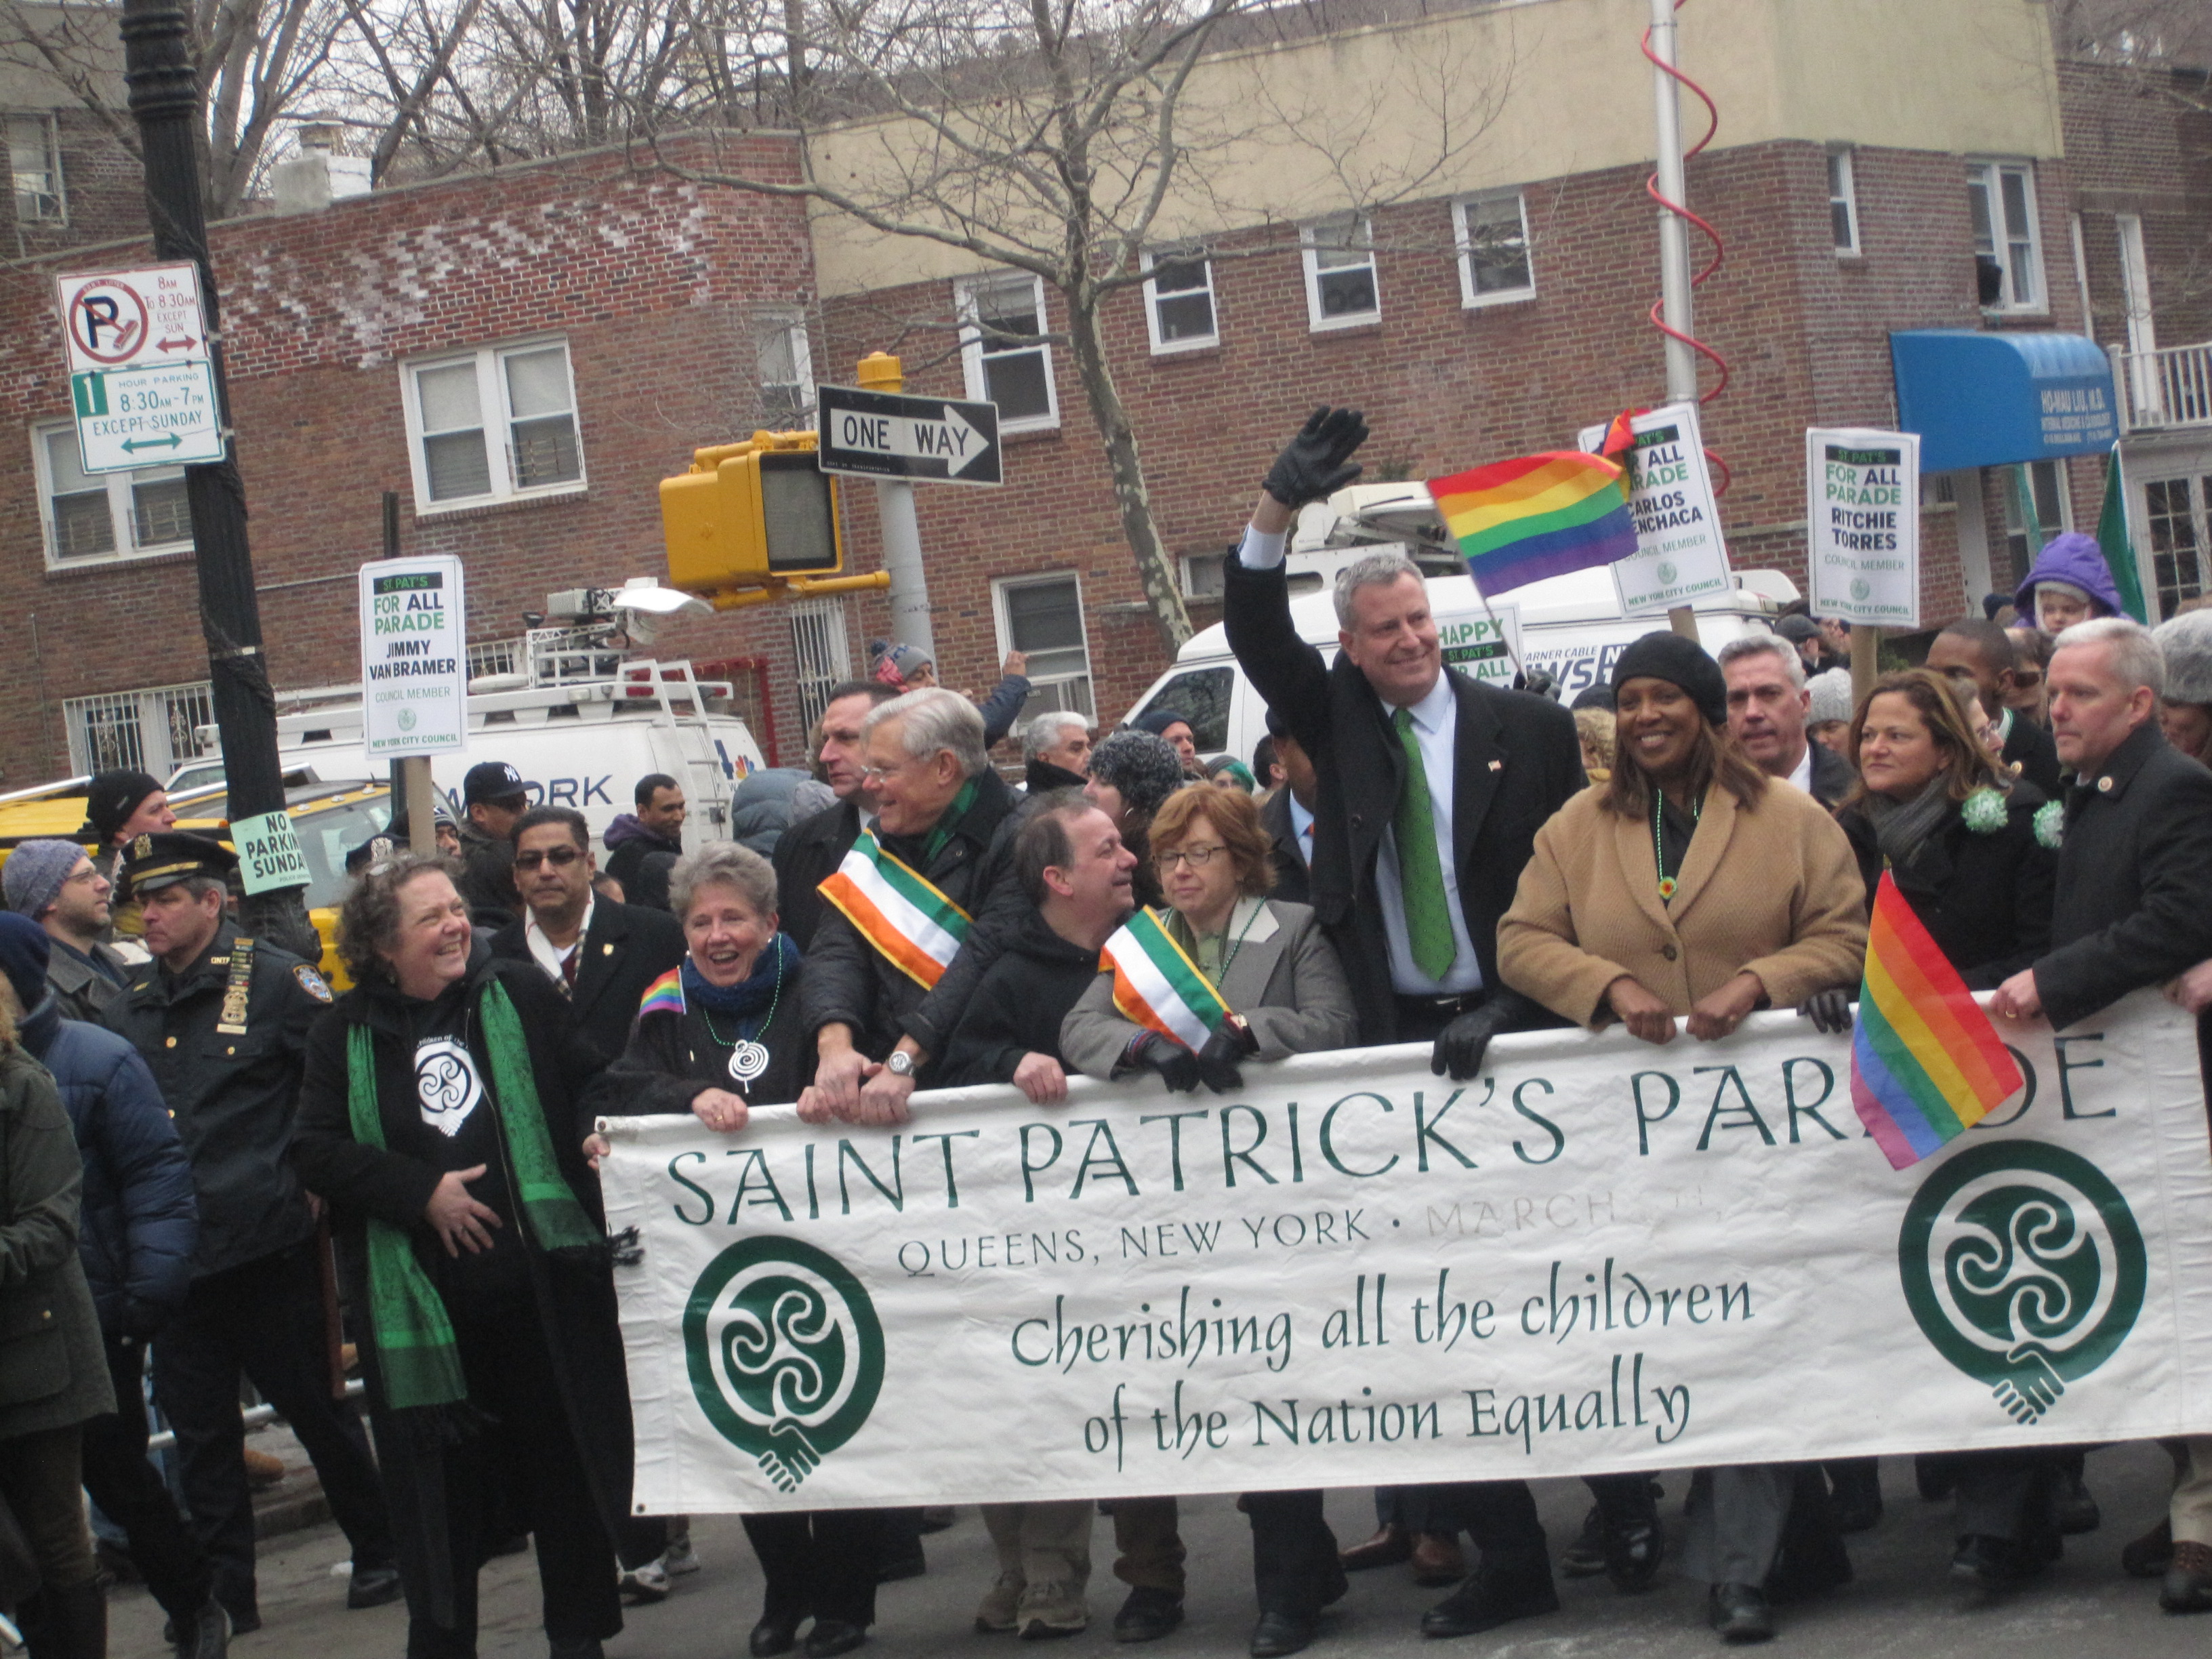 Bill de Blasio marching today in the St. Pat's for All Parade.